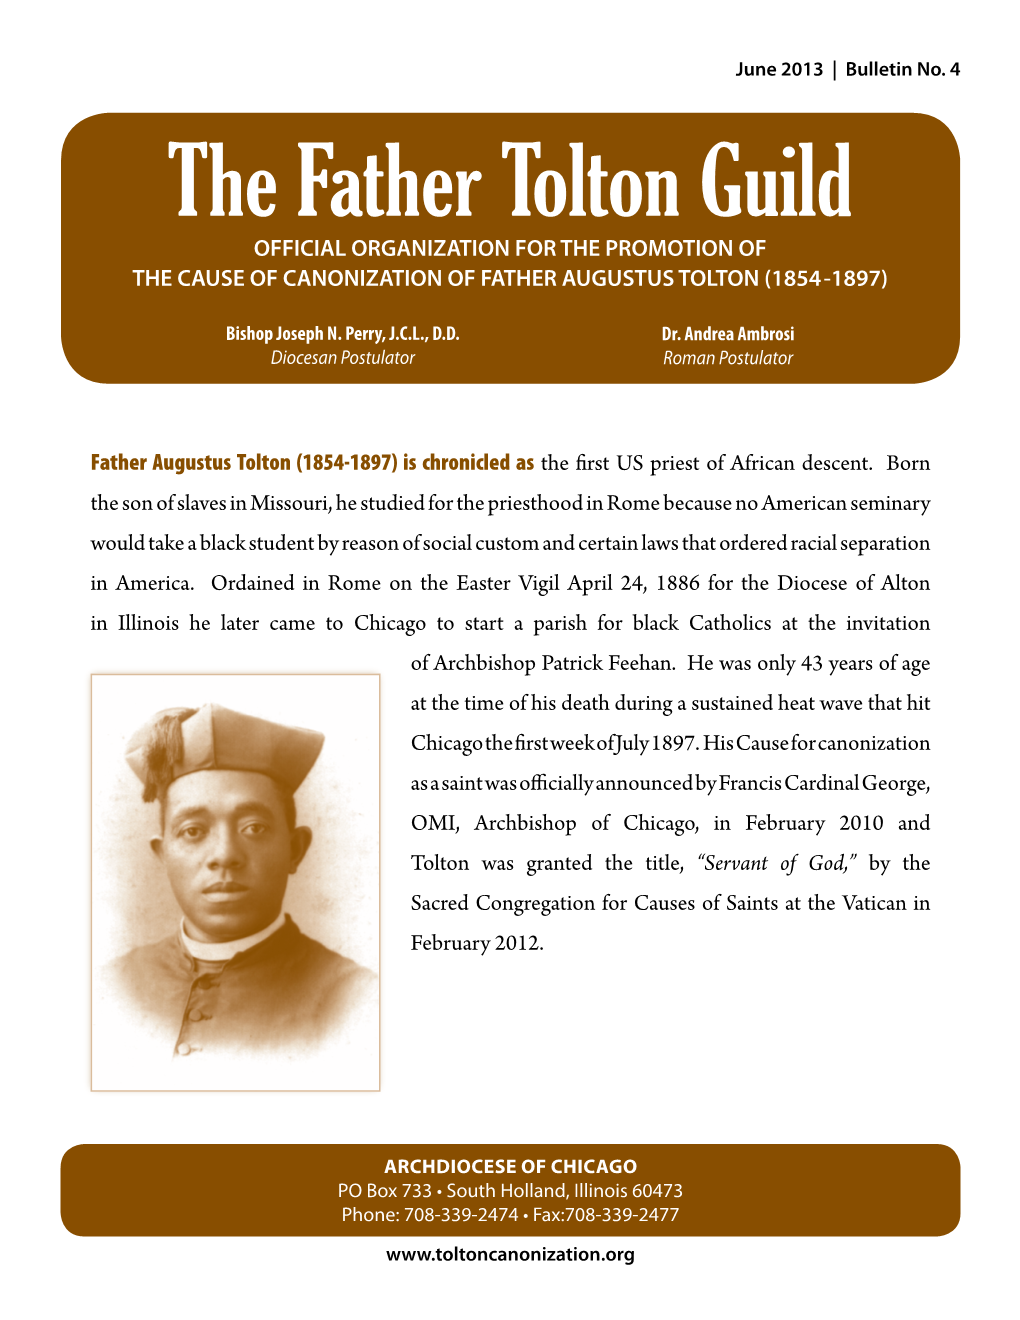 The Father Tolton Guild OFFICIAL ORGANIZATION for the PROMOTION of the CAUSE of CANONIZATION of FATHER AUGUSTUS TOLTON (1854-1897)